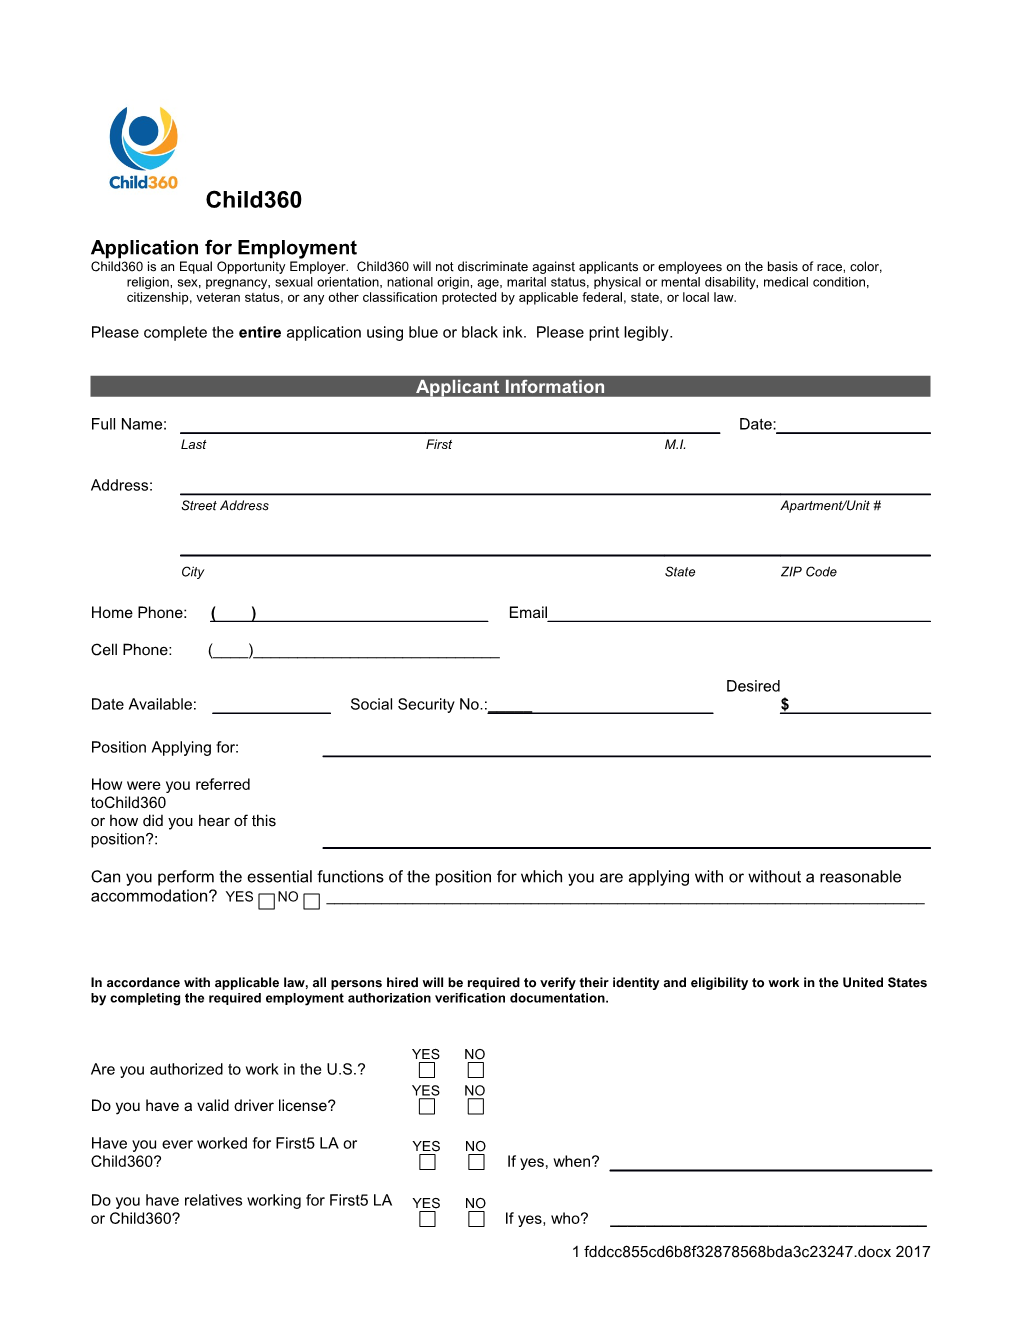 Application for Employment s128